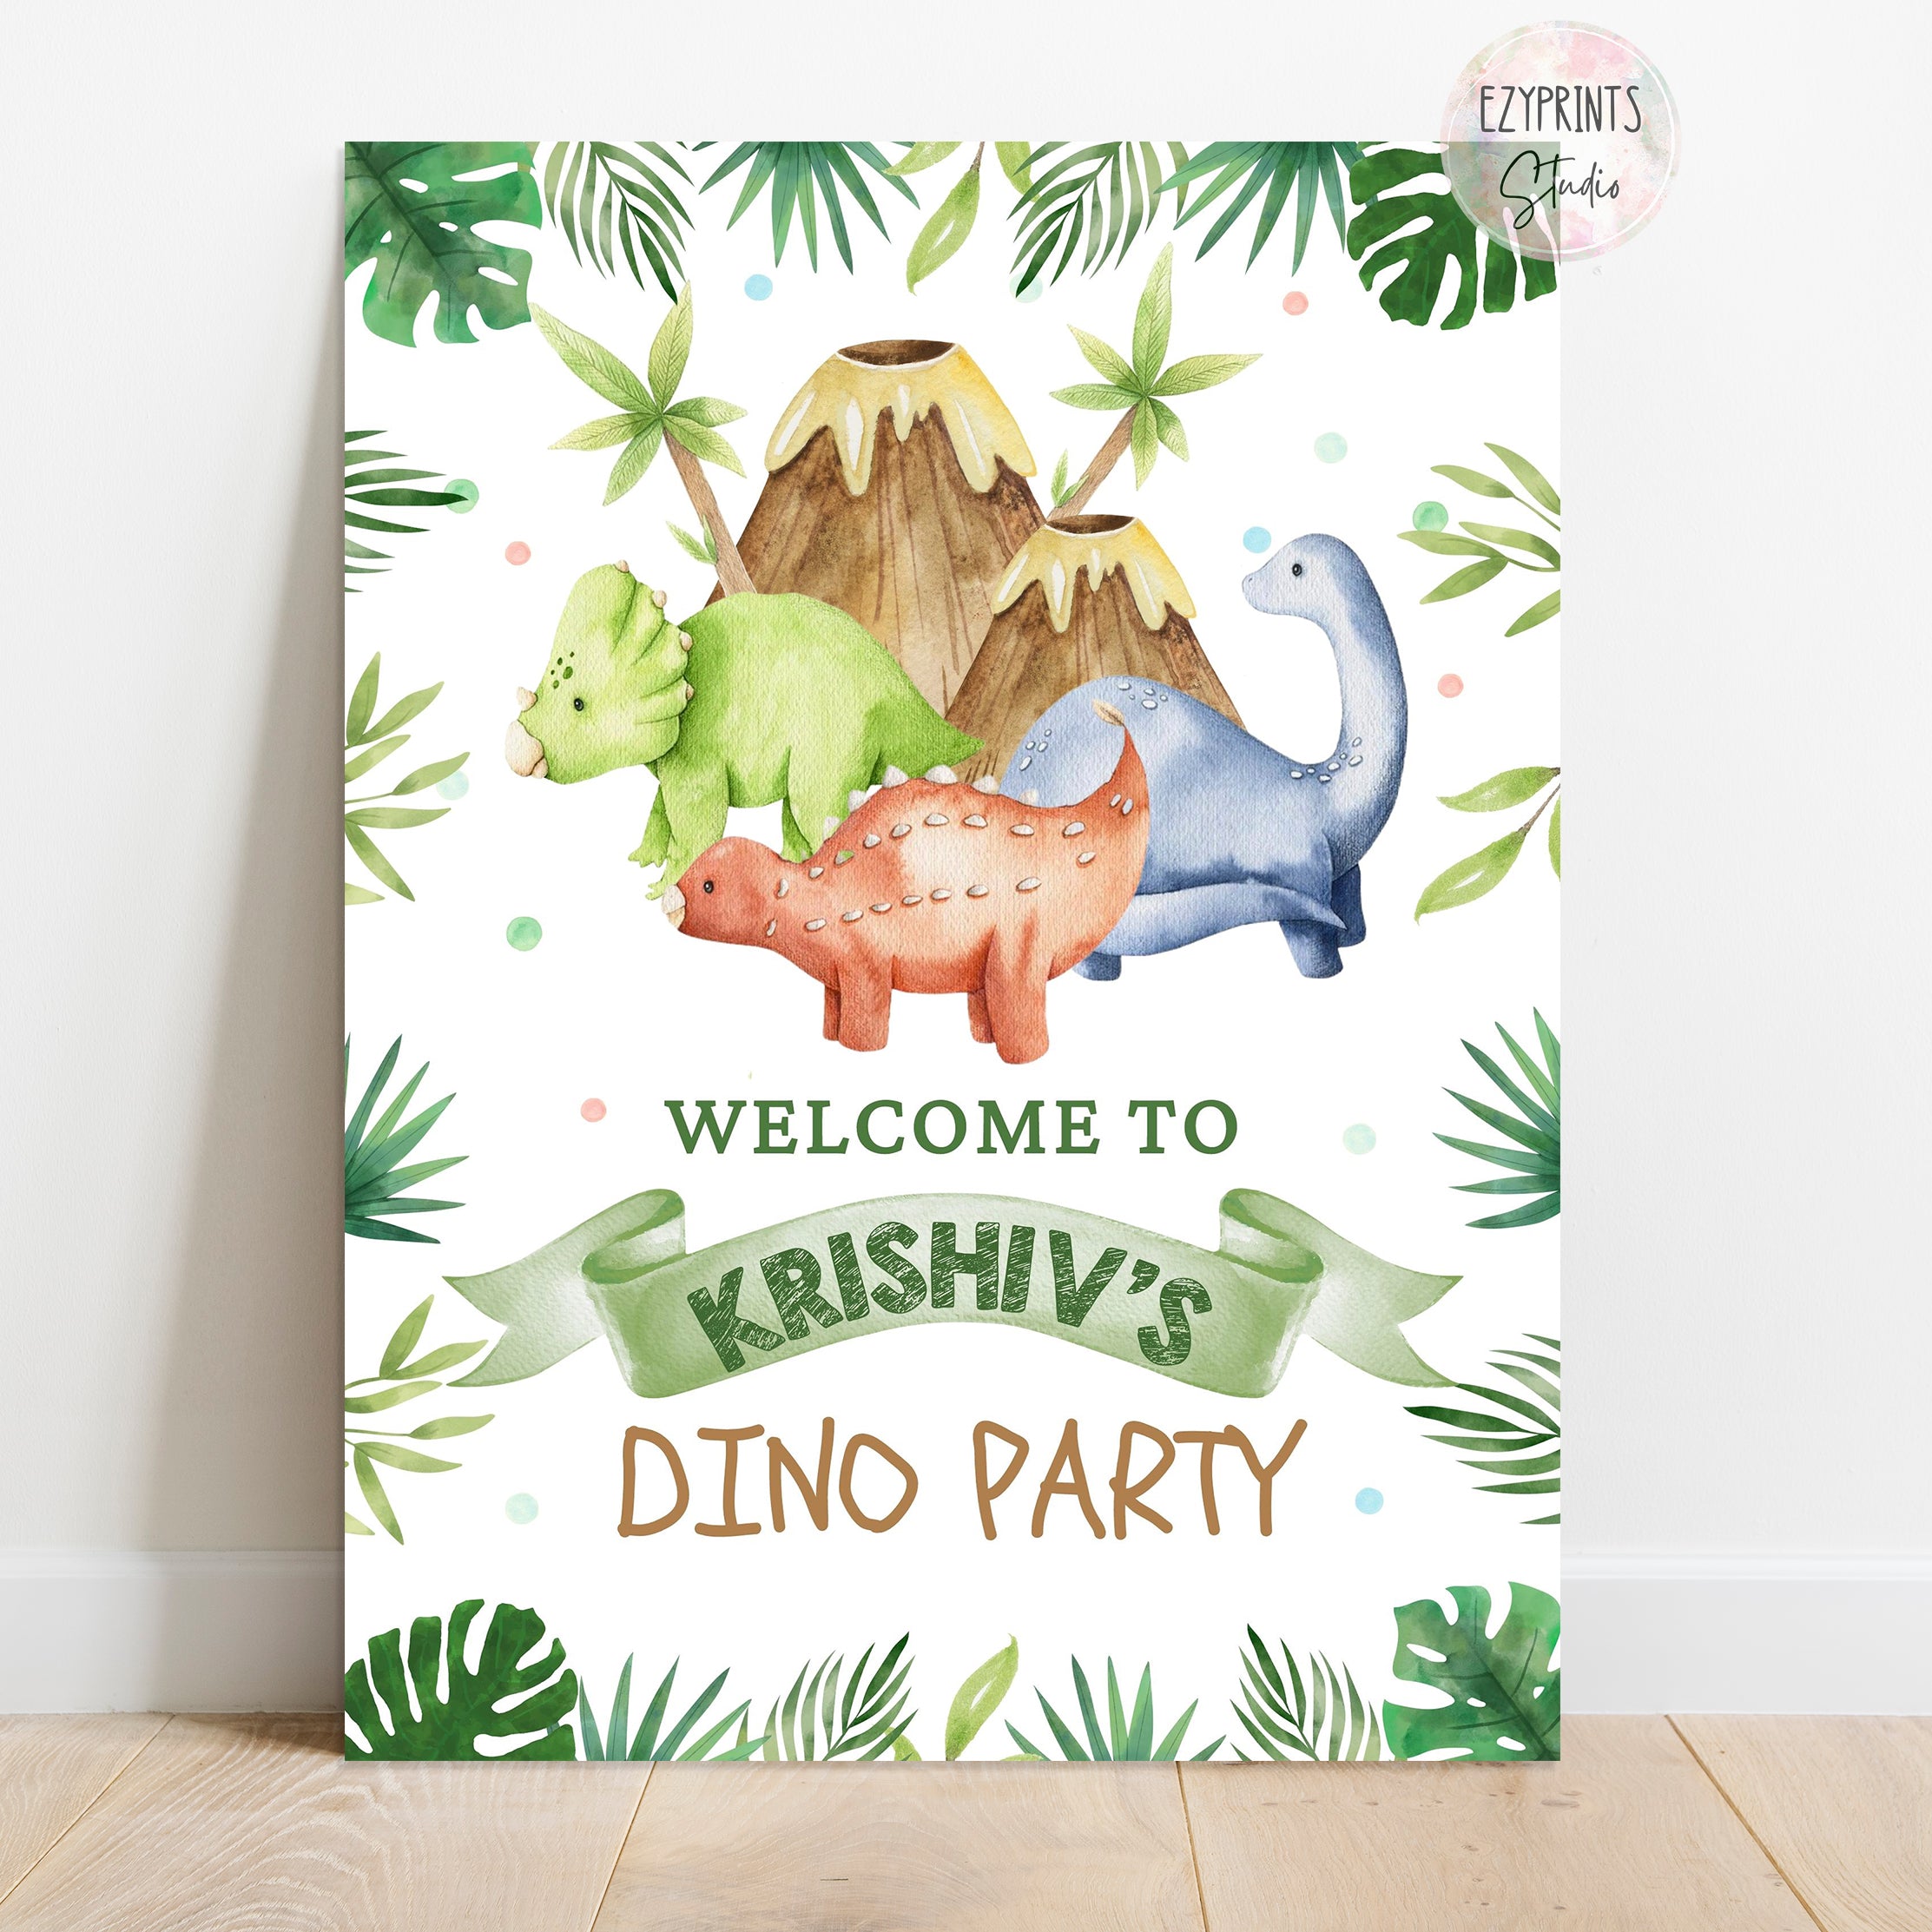 Dinosaur Theme Birthday Party Welcome Board